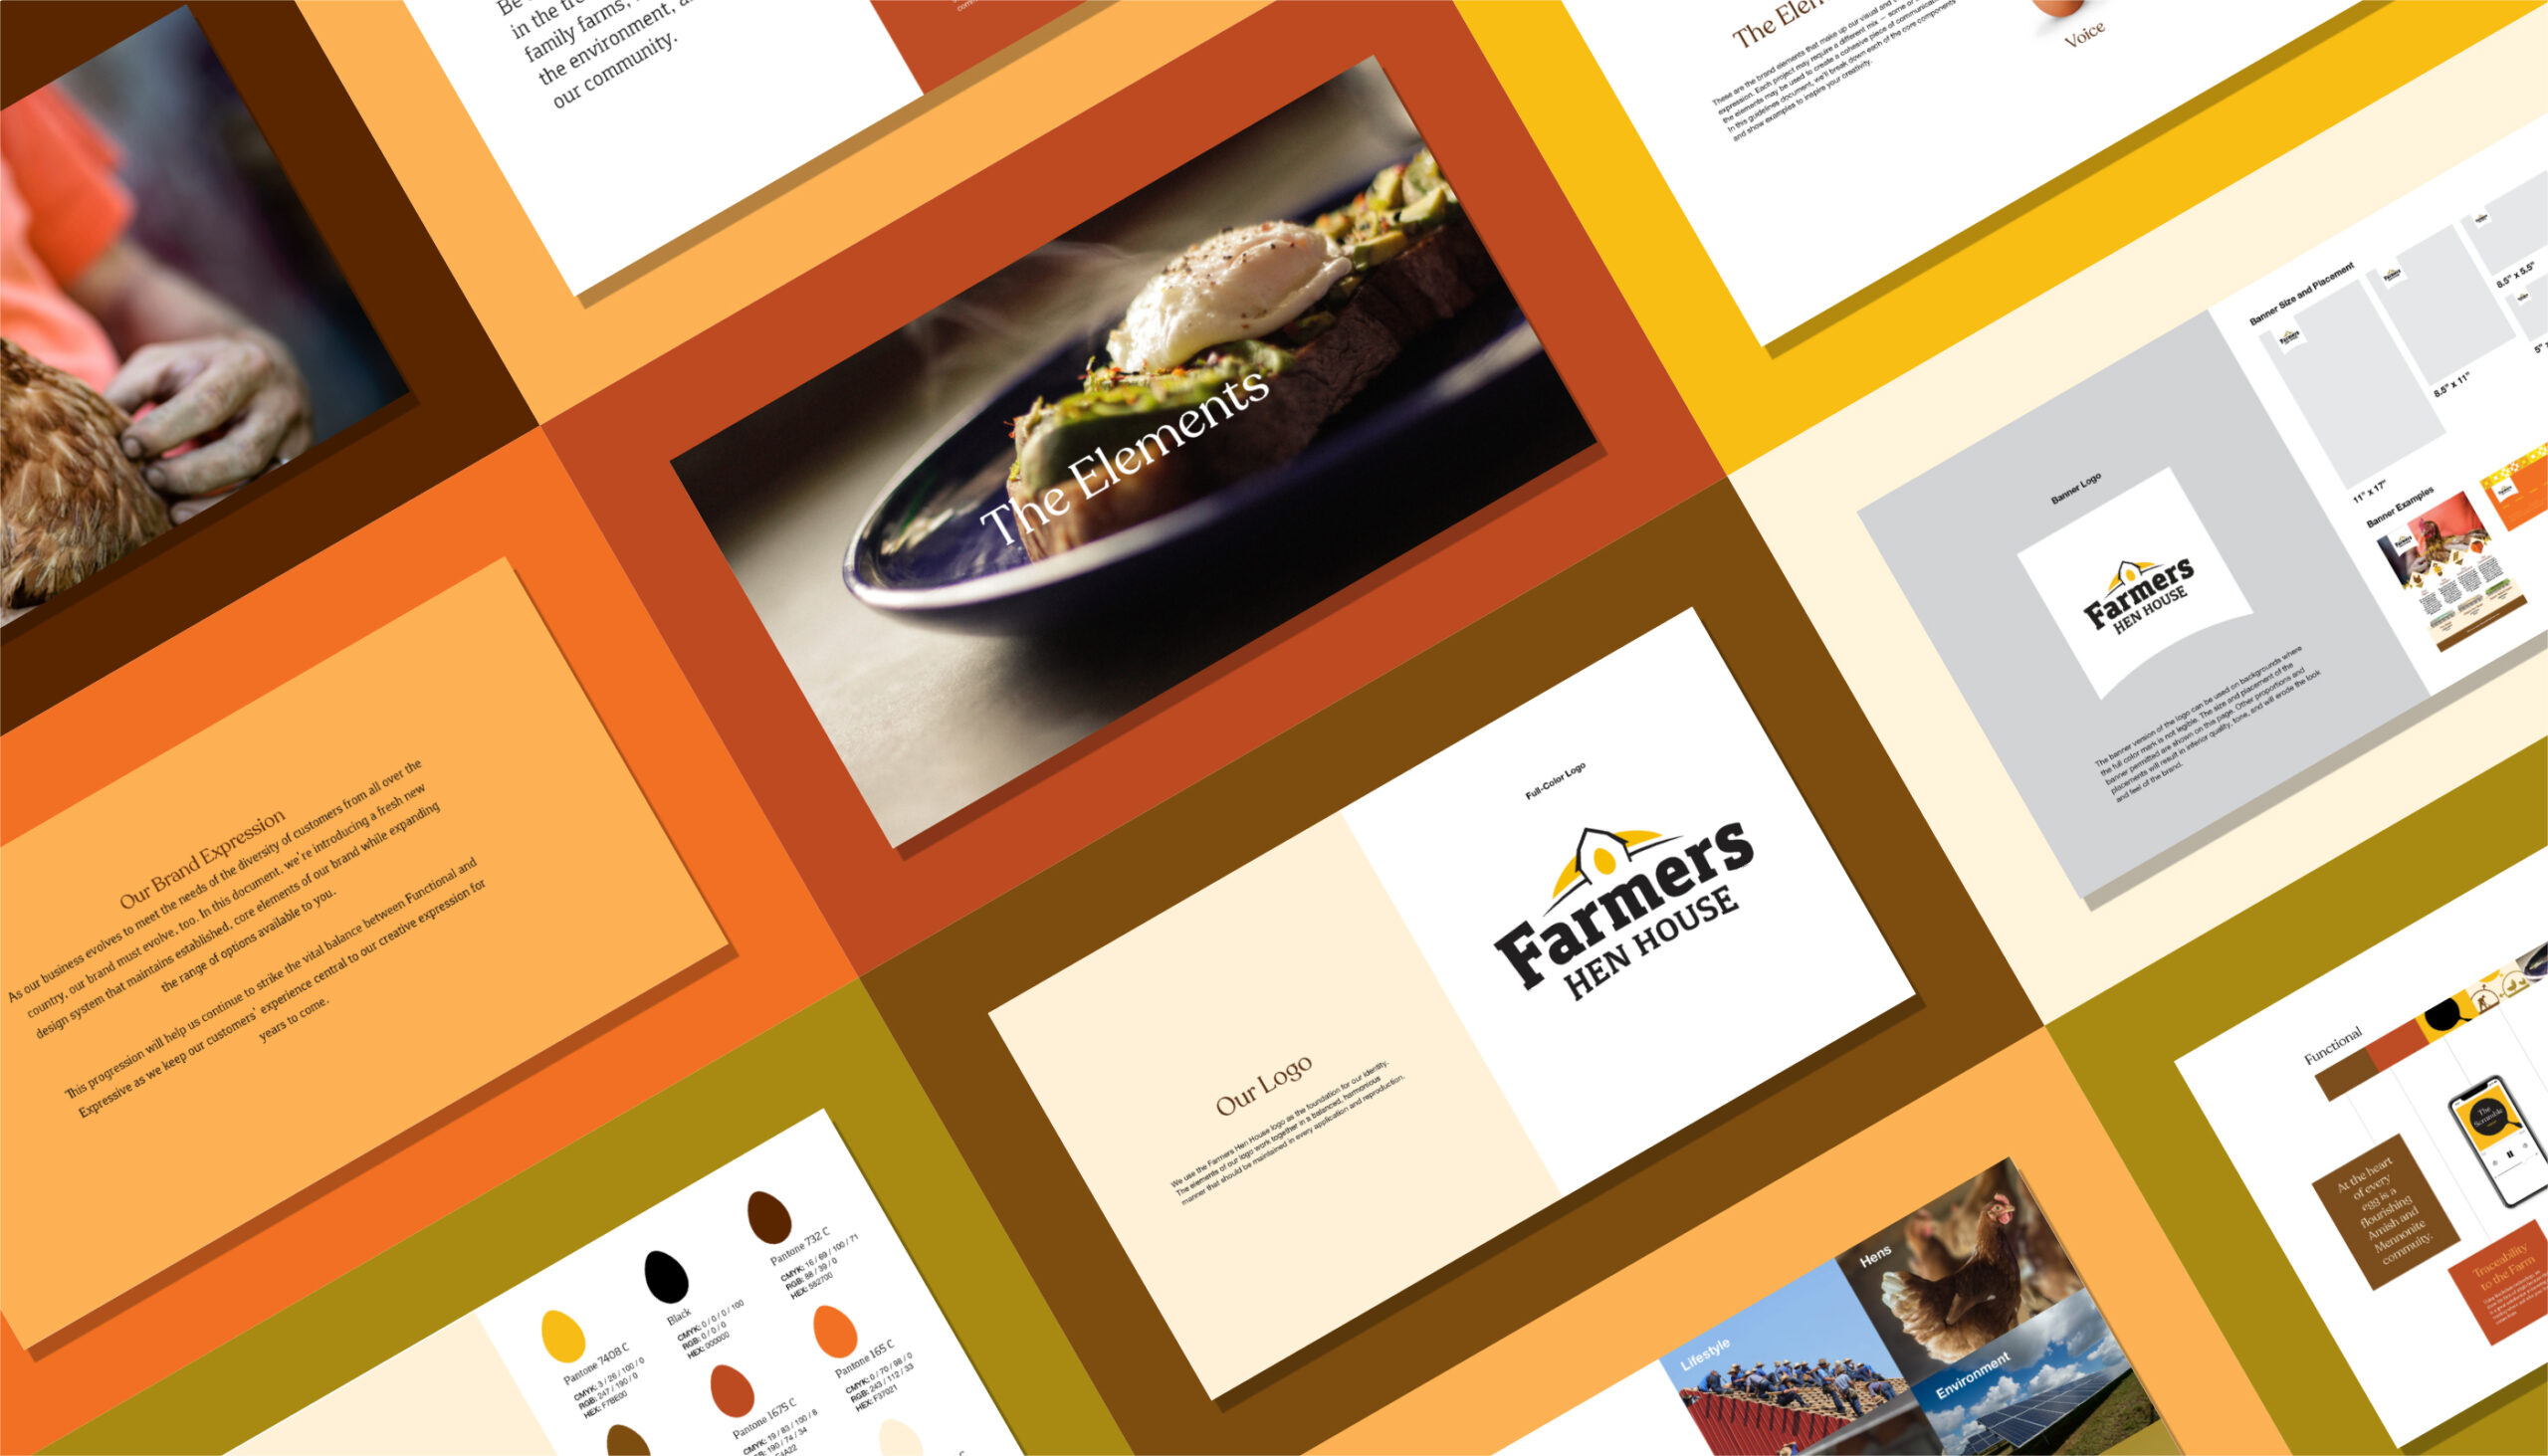 Farmers Hen House brand expression examples